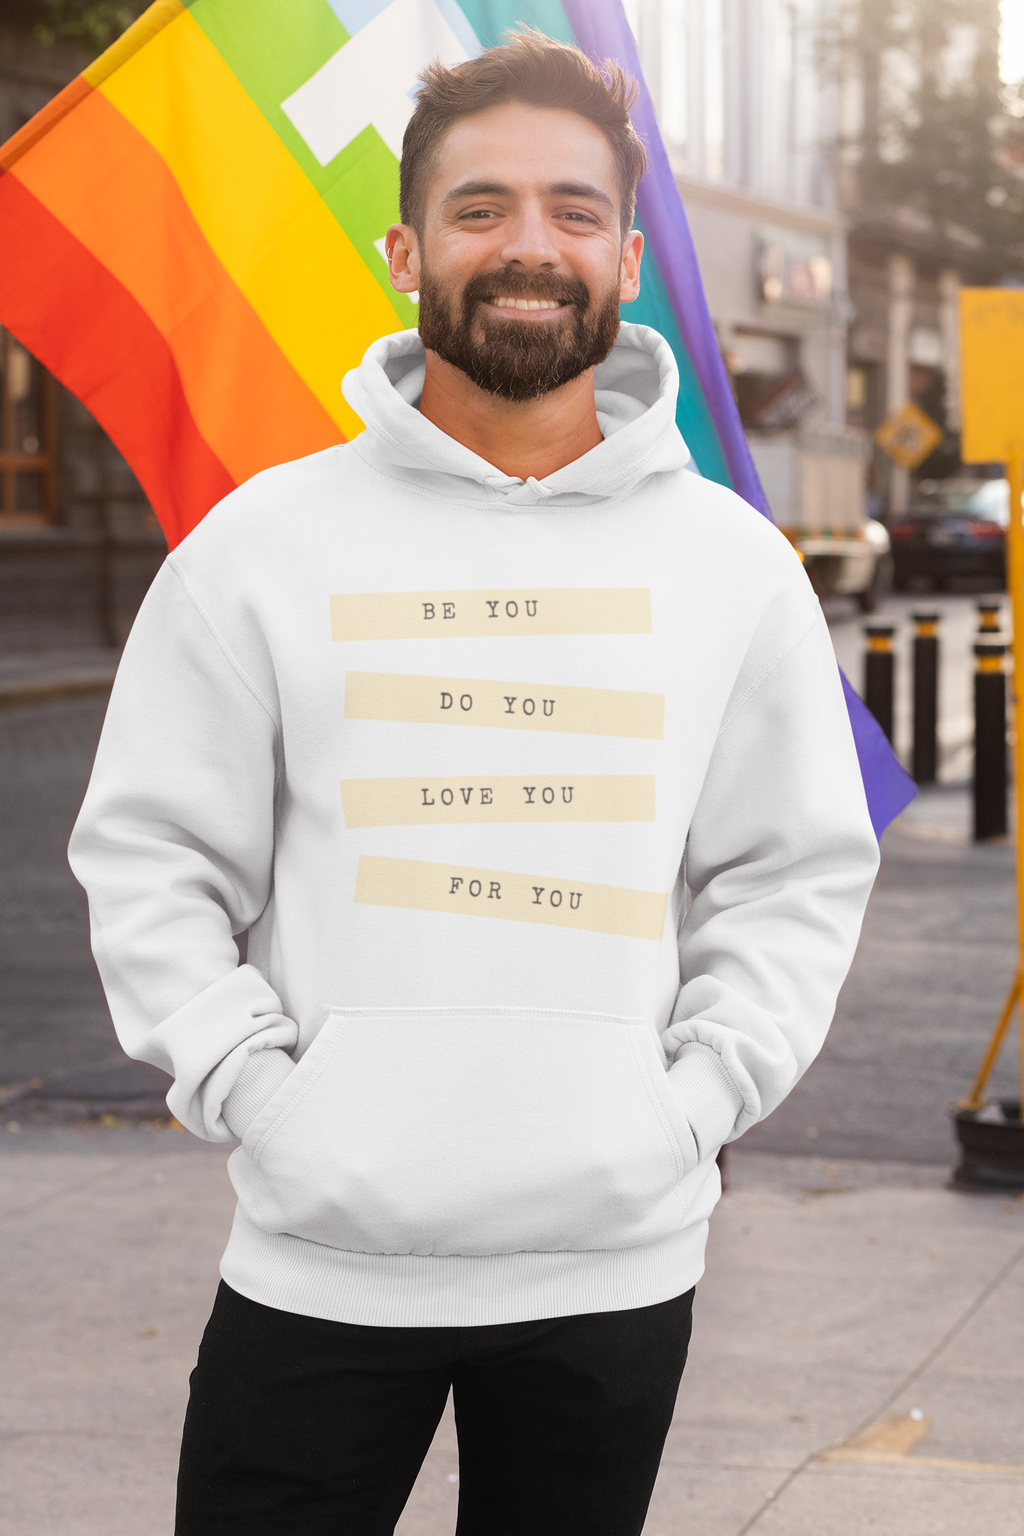 Be You Unisex Hooded Sweatshirt, Classic Fit, Gift Item - Cheers Together Gift House